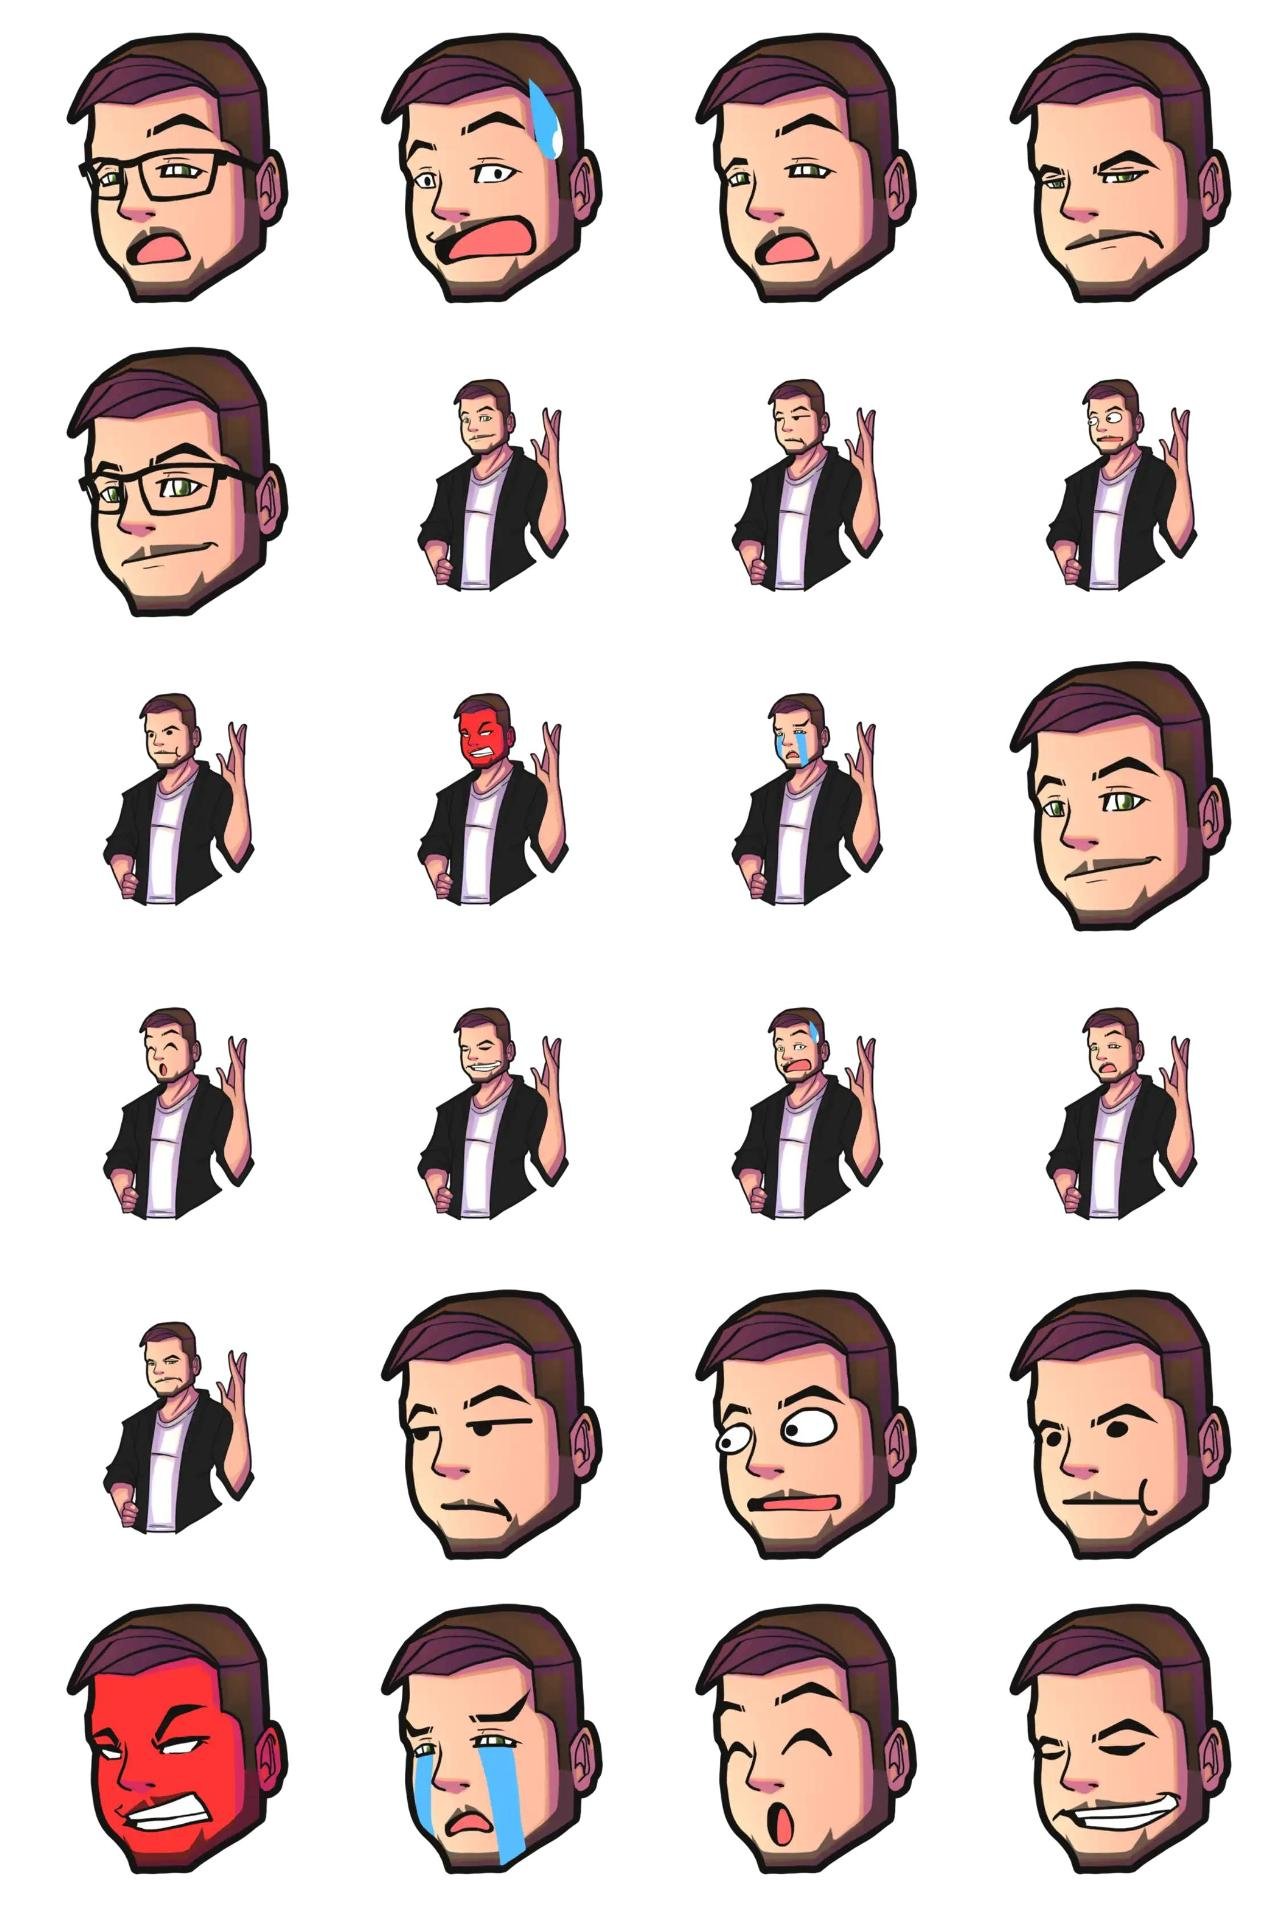 Ray Emoji Reaction Human Animation/Cartoon sticker pack for Whatsapp, Telegram, Signal, and others chatting and message apps